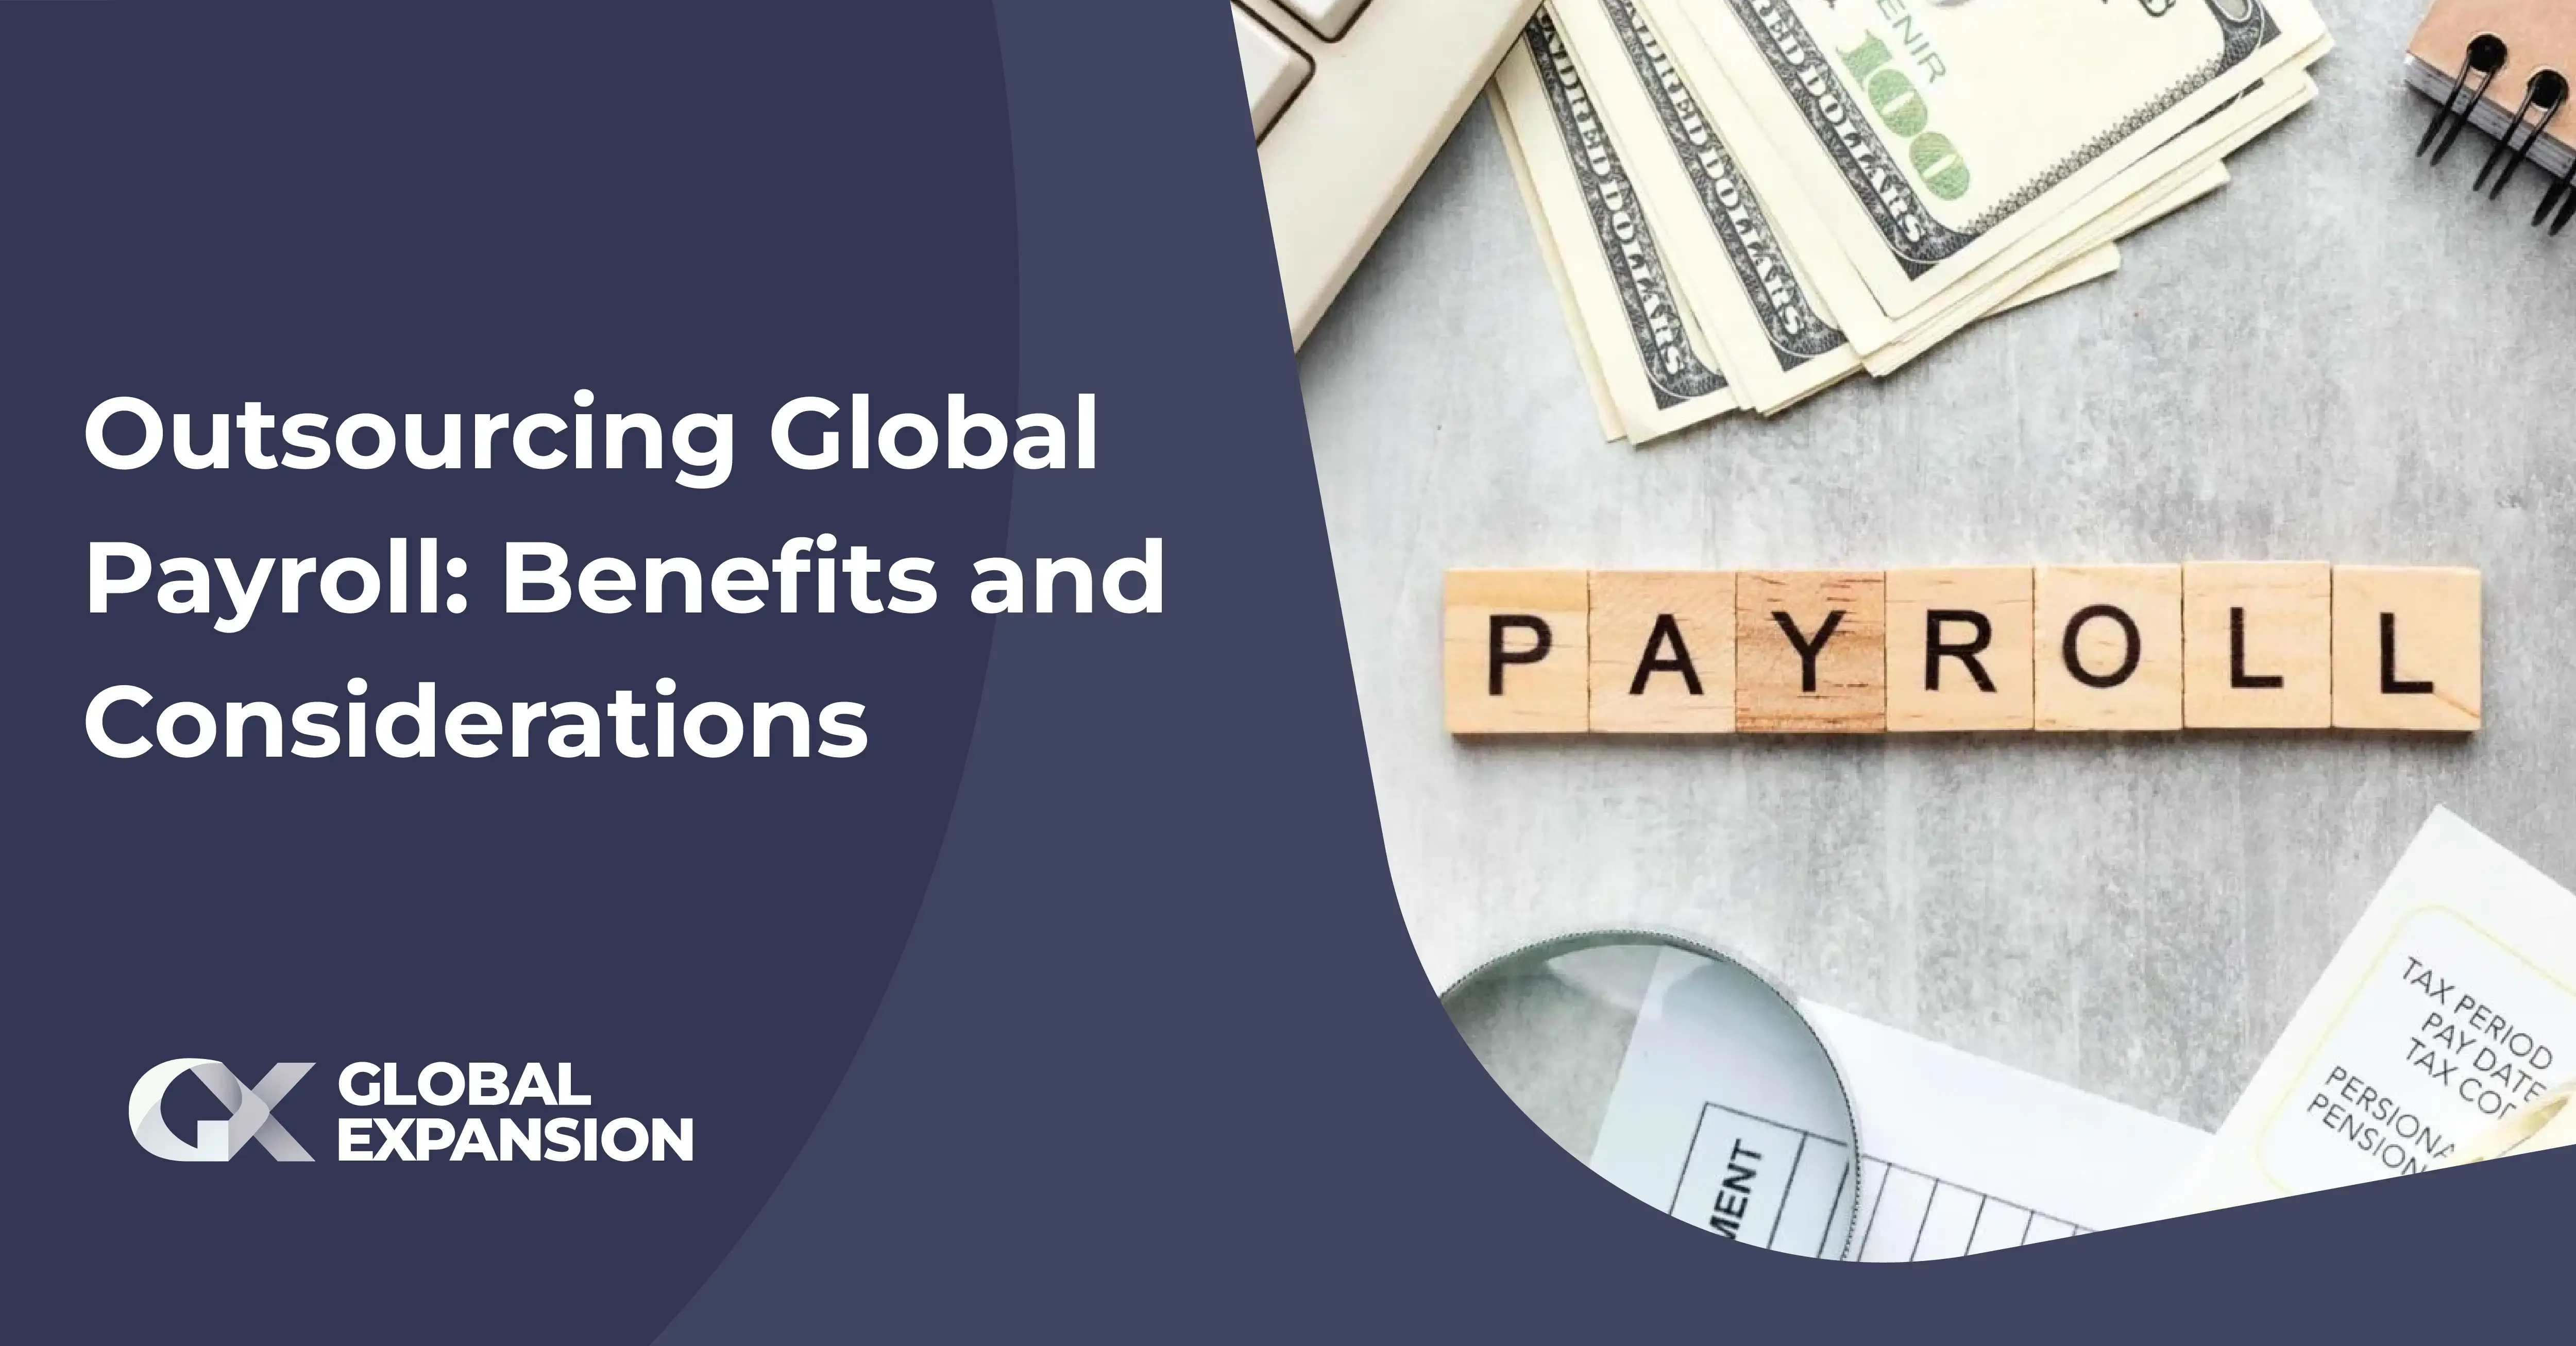 Outsourcing Global Payroll: Benefits and Considerations